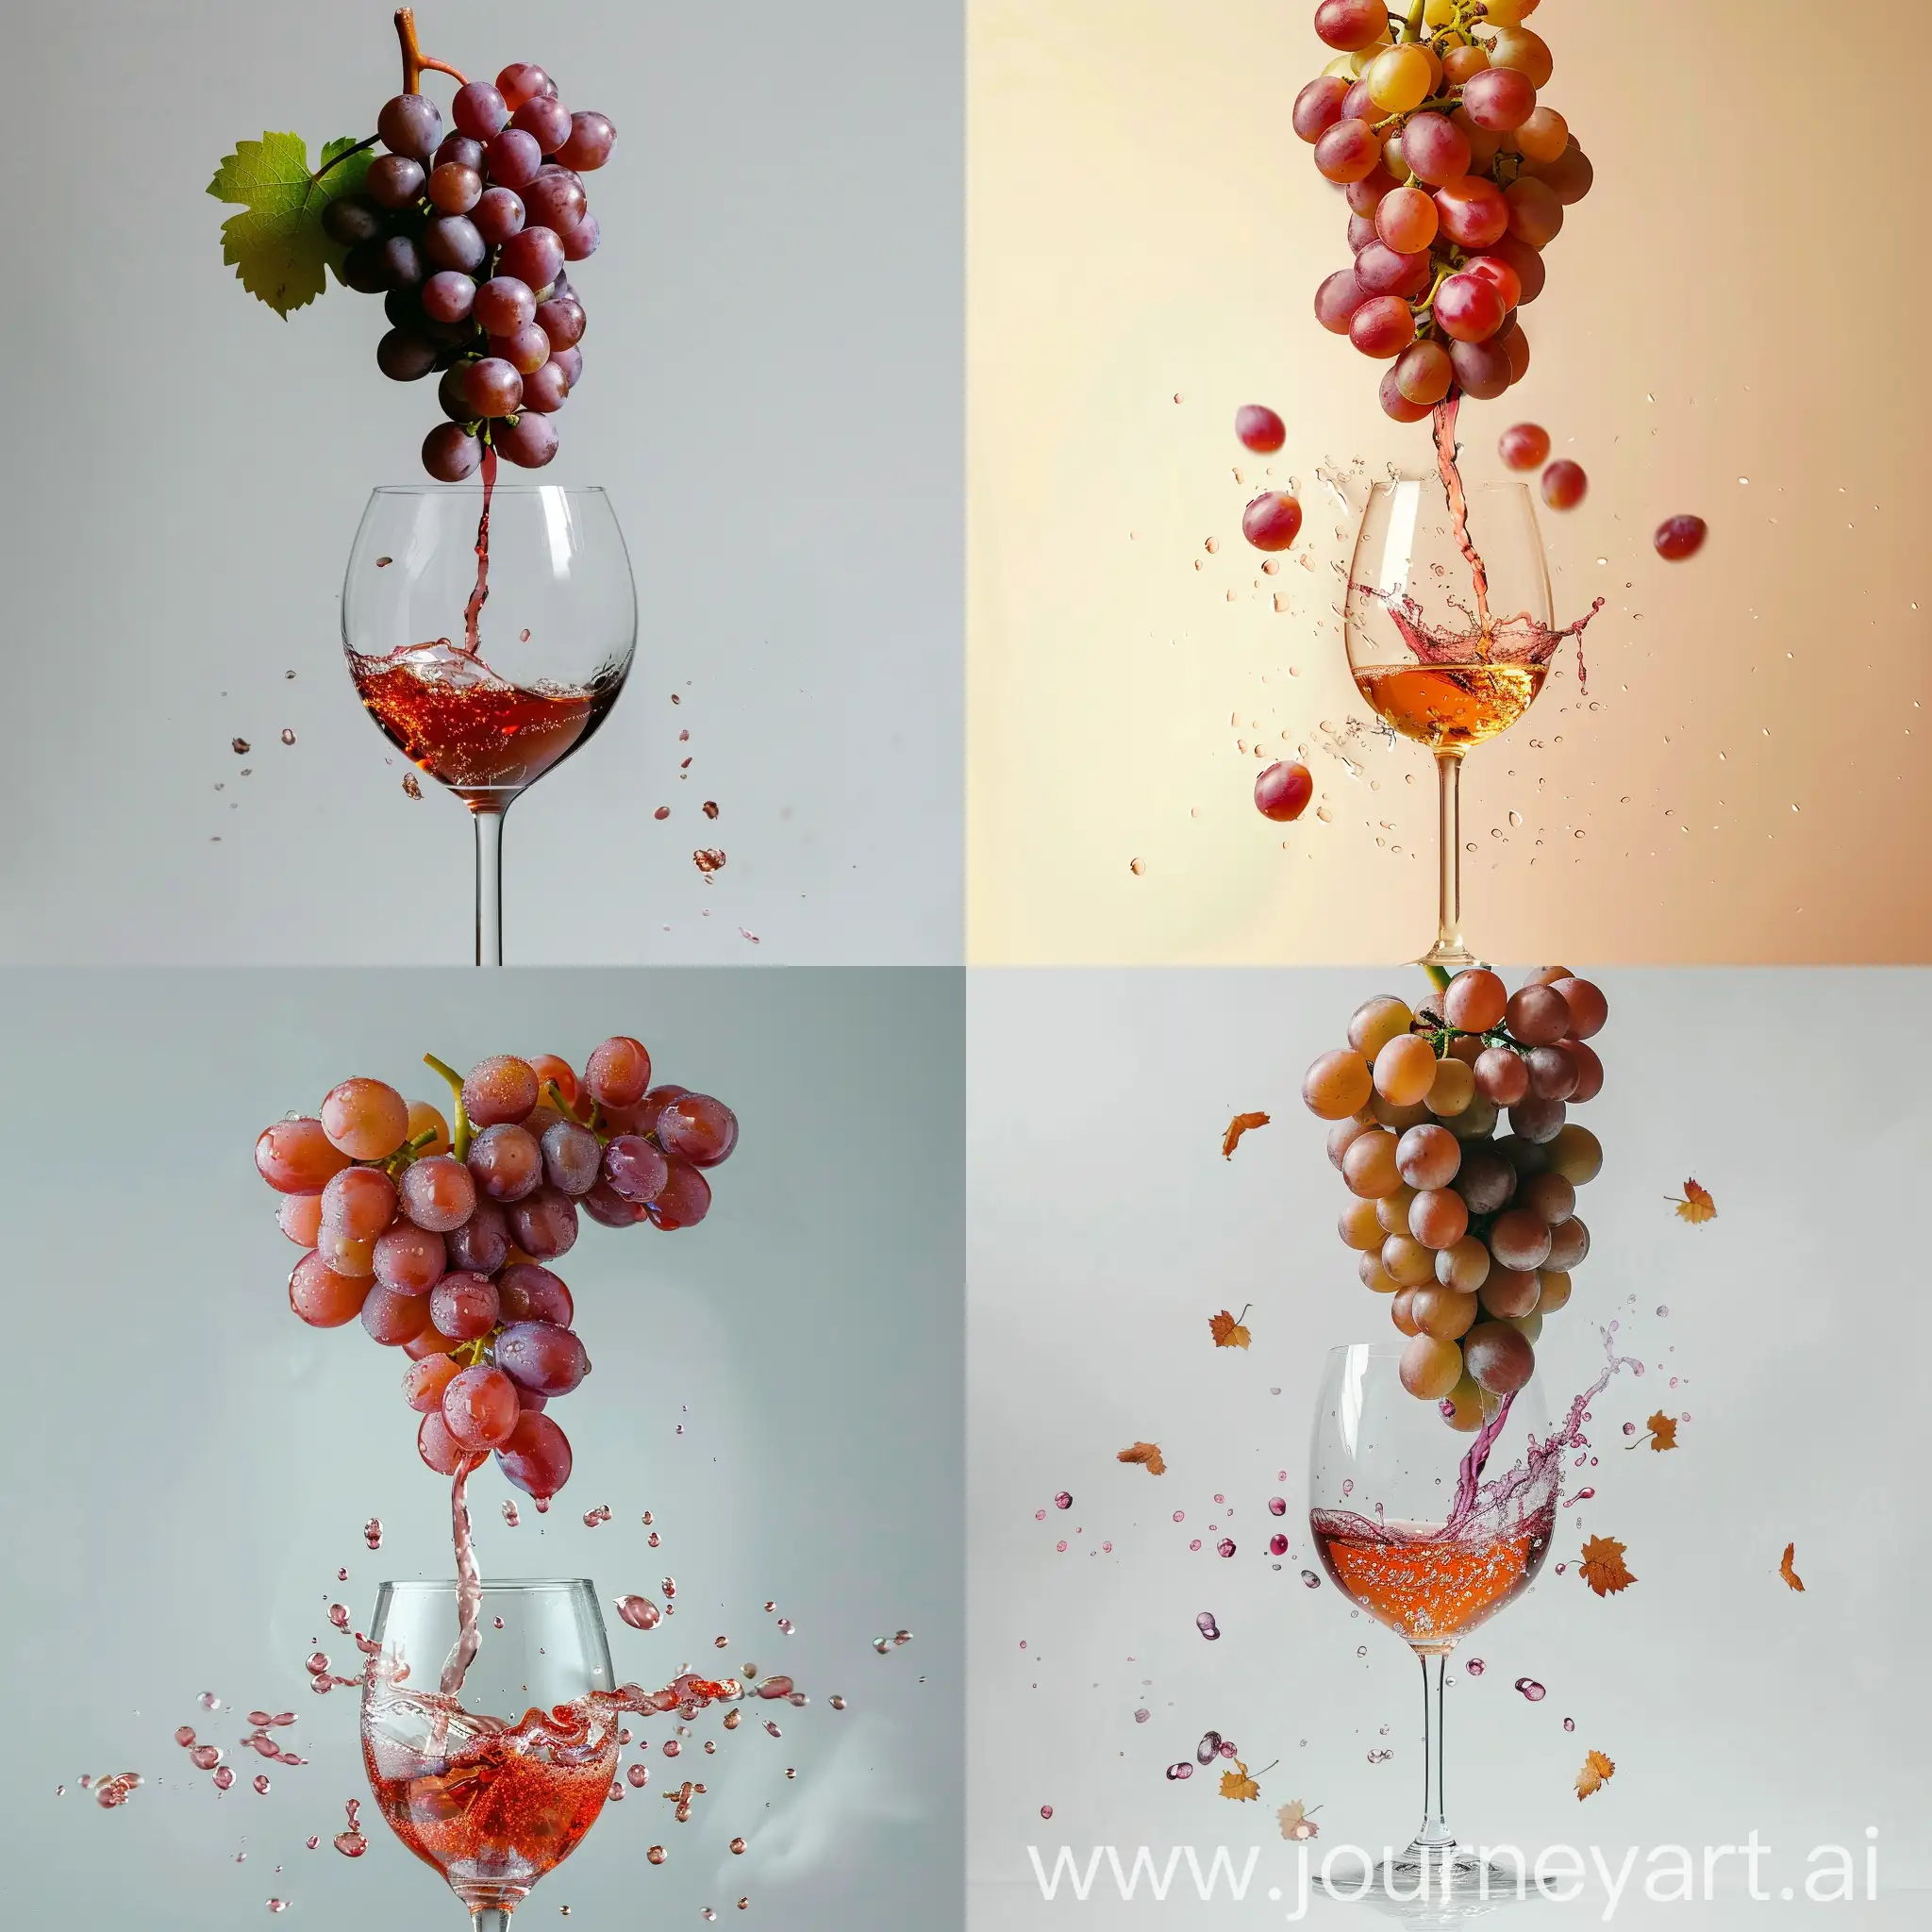 Flowing-Wine-Pouring-Over-Grapes-into-Glass